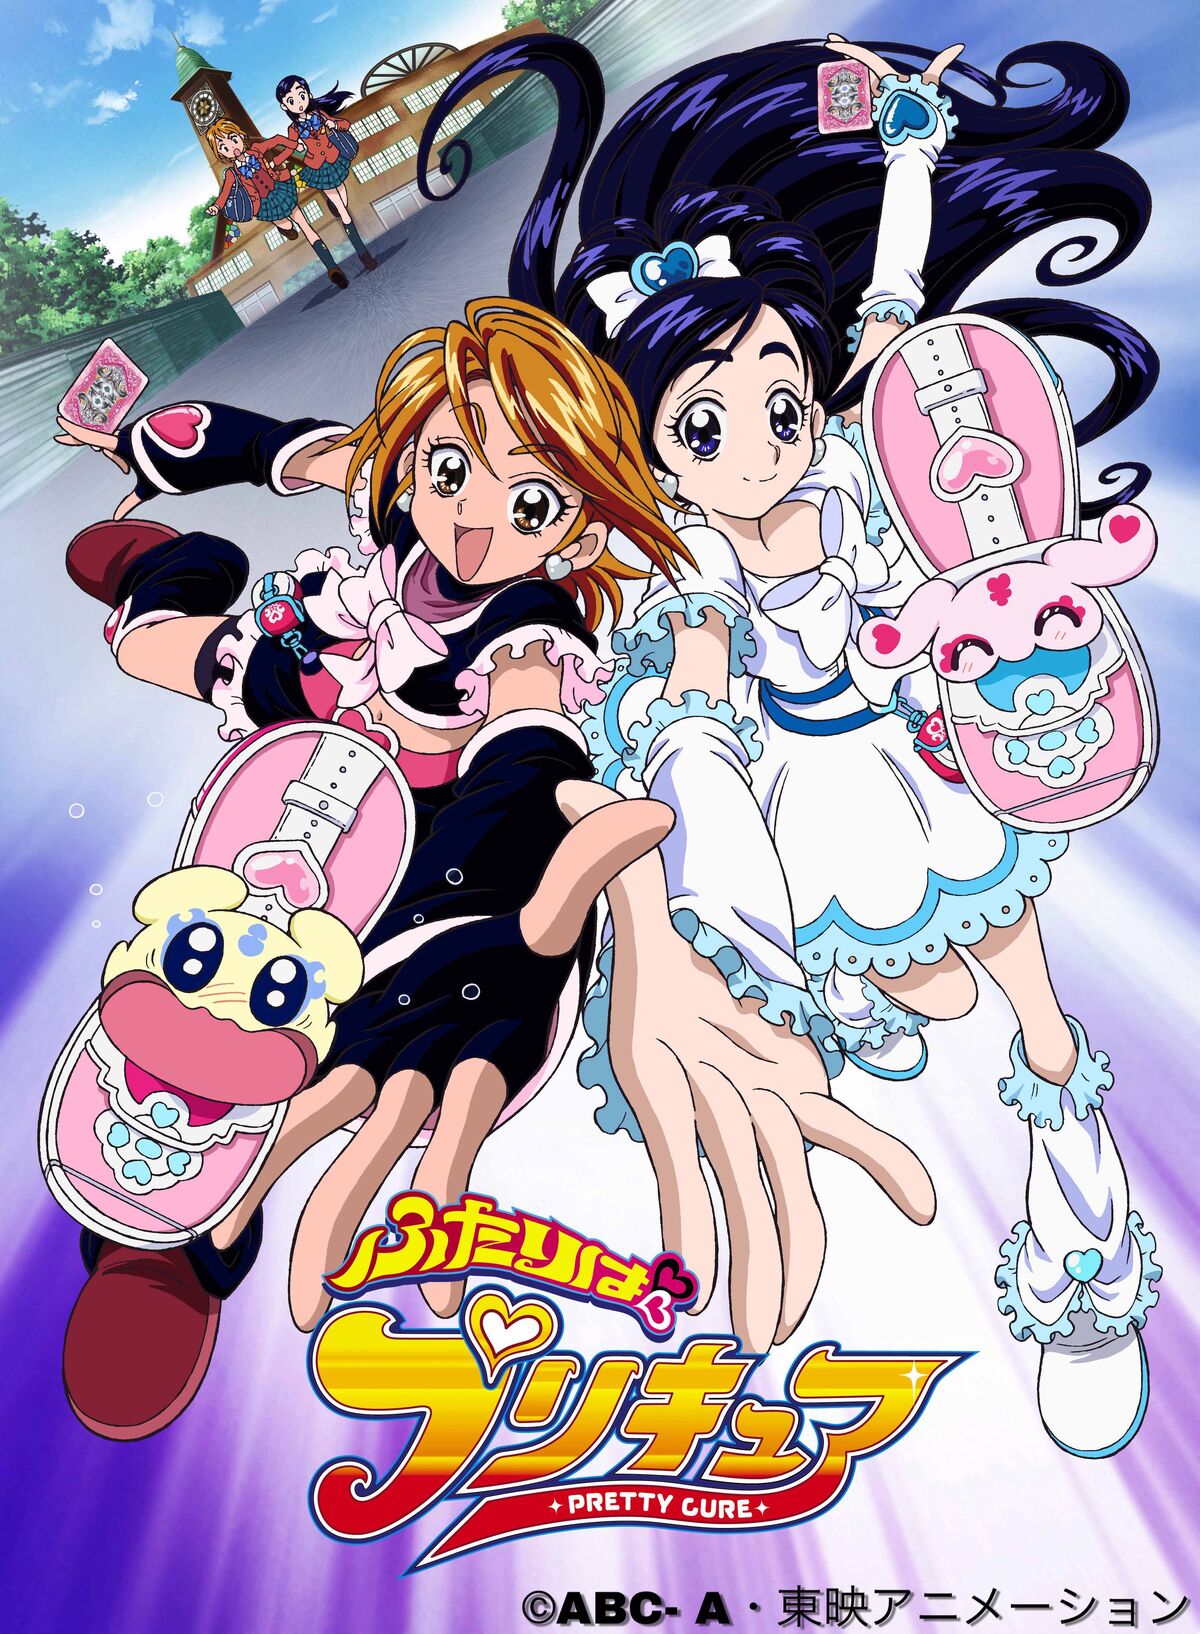 Magical Girl Site—Episodes 1-12 Streaming - Review - Anime News Network